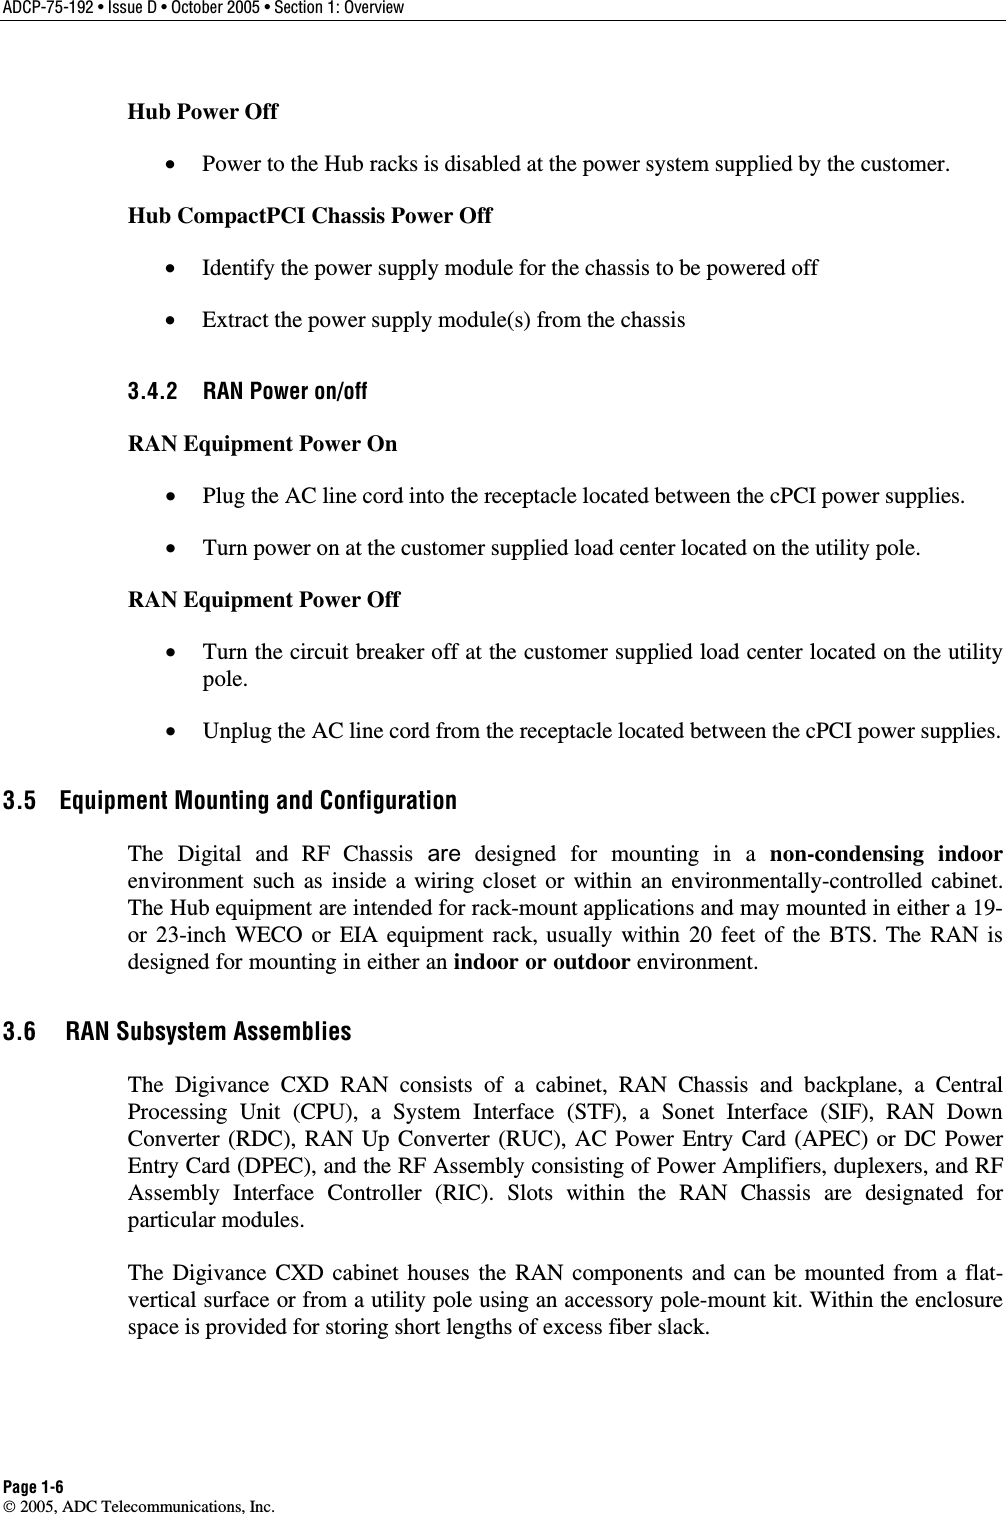 ADCP-75-192 • Issue D • October 2005 • Section 1: Overview Page 1-6  2005, ADC Telecommunications, Inc. Hub Power Off •  Power to the Hub racks is disabled at the power system supplied by the customer. Hub CompactPCI Chassis Power Off •  Identify the power supply module for the chassis to be powered off •  Extract the power supply module(s) from the chassis 3.4.2  RAN Power on/off RAN Equipment Power On •  Plug the AC line cord into the receptacle located between the cPCI power supplies. •  Turn power on at the customer supplied load center located on the utility pole. RAN Equipment Power Off •  Turn the circuit breaker off at the customer supplied load center located on the utility pole. •  Unplug the AC line cord from the receptacle located between the cPCI power supplies. 3.5  Equipment Mounting and Configuration The Digital and RF Chassis are designed for mounting in a non-condensing indoor environment such as inside a wiring closet or within an environmentally-controlled cabinet. The Hub equipment are intended for rack-mount applications and may mounted in either a 19- or 23-inch WECO or EIA equipment rack, usually within 20 feet of the BTS. The RAN is designed for mounting in either an indoor or outdoor environment.  3.6   RAN Subsystem Assemblies The Digivance CXD RAN consists of a cabinet, RAN Chassis and backplane, a Central Processing Unit (CPU), a System Interface (STF), a Sonet Interface (SIF), RAN Down Converter (RDC), RAN Up Converter (RUC), AC Power Entry Card (APEC) or DC Power Entry Card (DPEC), and the RF Assembly consisting of Power Amplifiers, duplexers, and RF Assembly Interface Controller (RIC). Slots within the RAN Chassis are designated for particular modules.   The Digivance CXD cabinet houses the RAN components and can be mounted from a flat-vertical surface or from a utility pole using an accessory pole-mount kit. Within the enclosure space is provided for storing short lengths of excess fiber slack.  